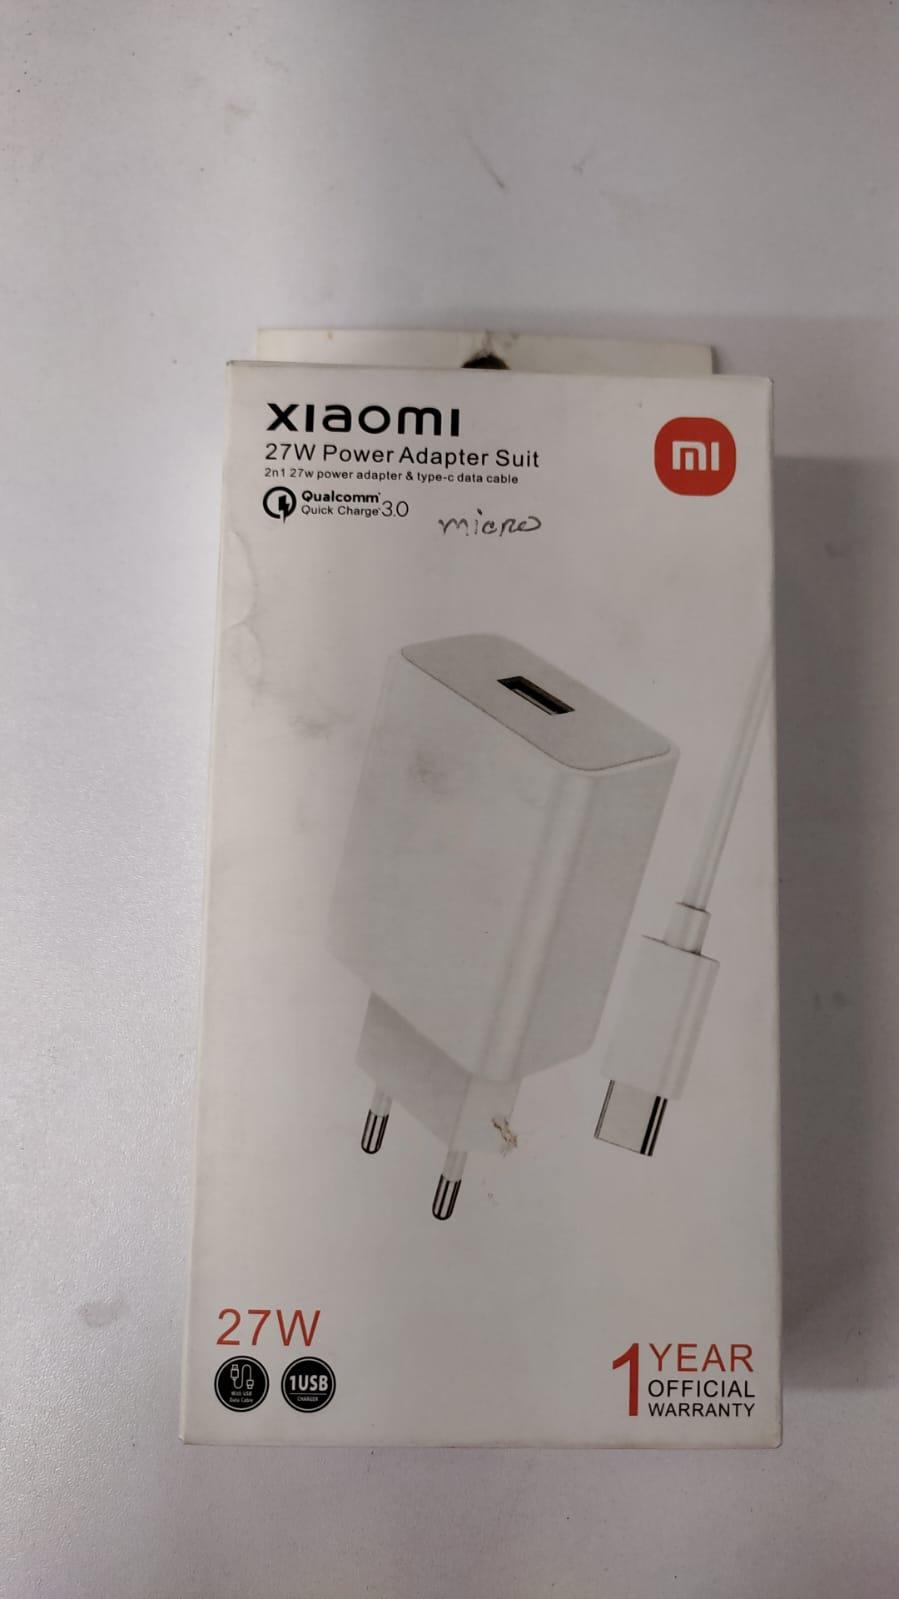 Mi Redmi 27W Power Adapter Suit Type B 2 pin charger